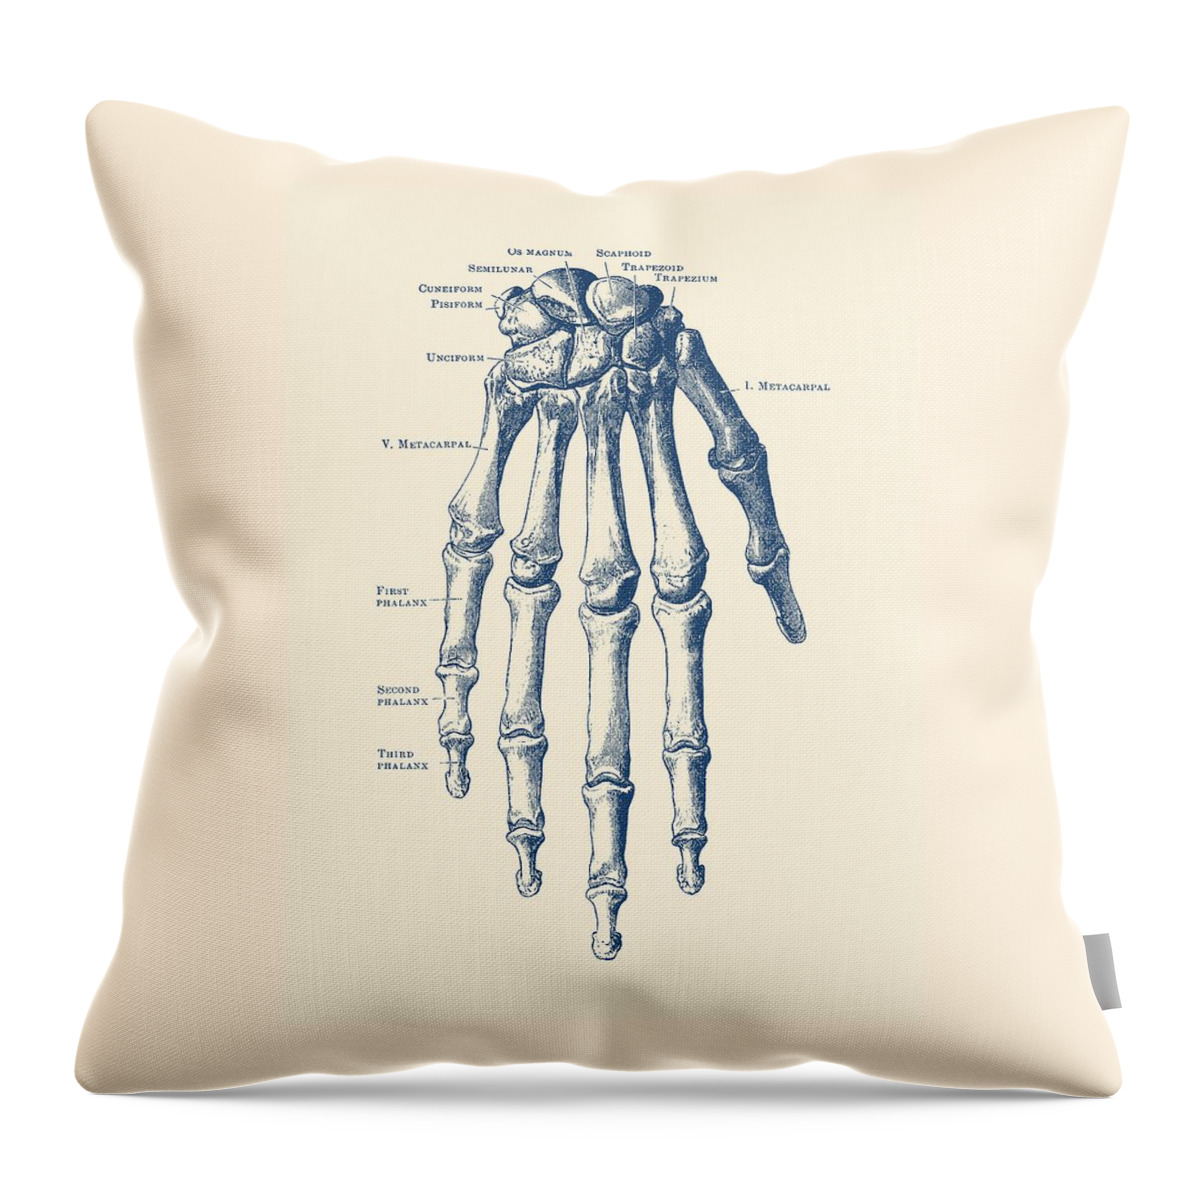 Skeleton Hand Throw Pillow featuring the drawing Down Facing Hand Skeletal Diagram - Anatomy Print by Vintage Anatomy Prints